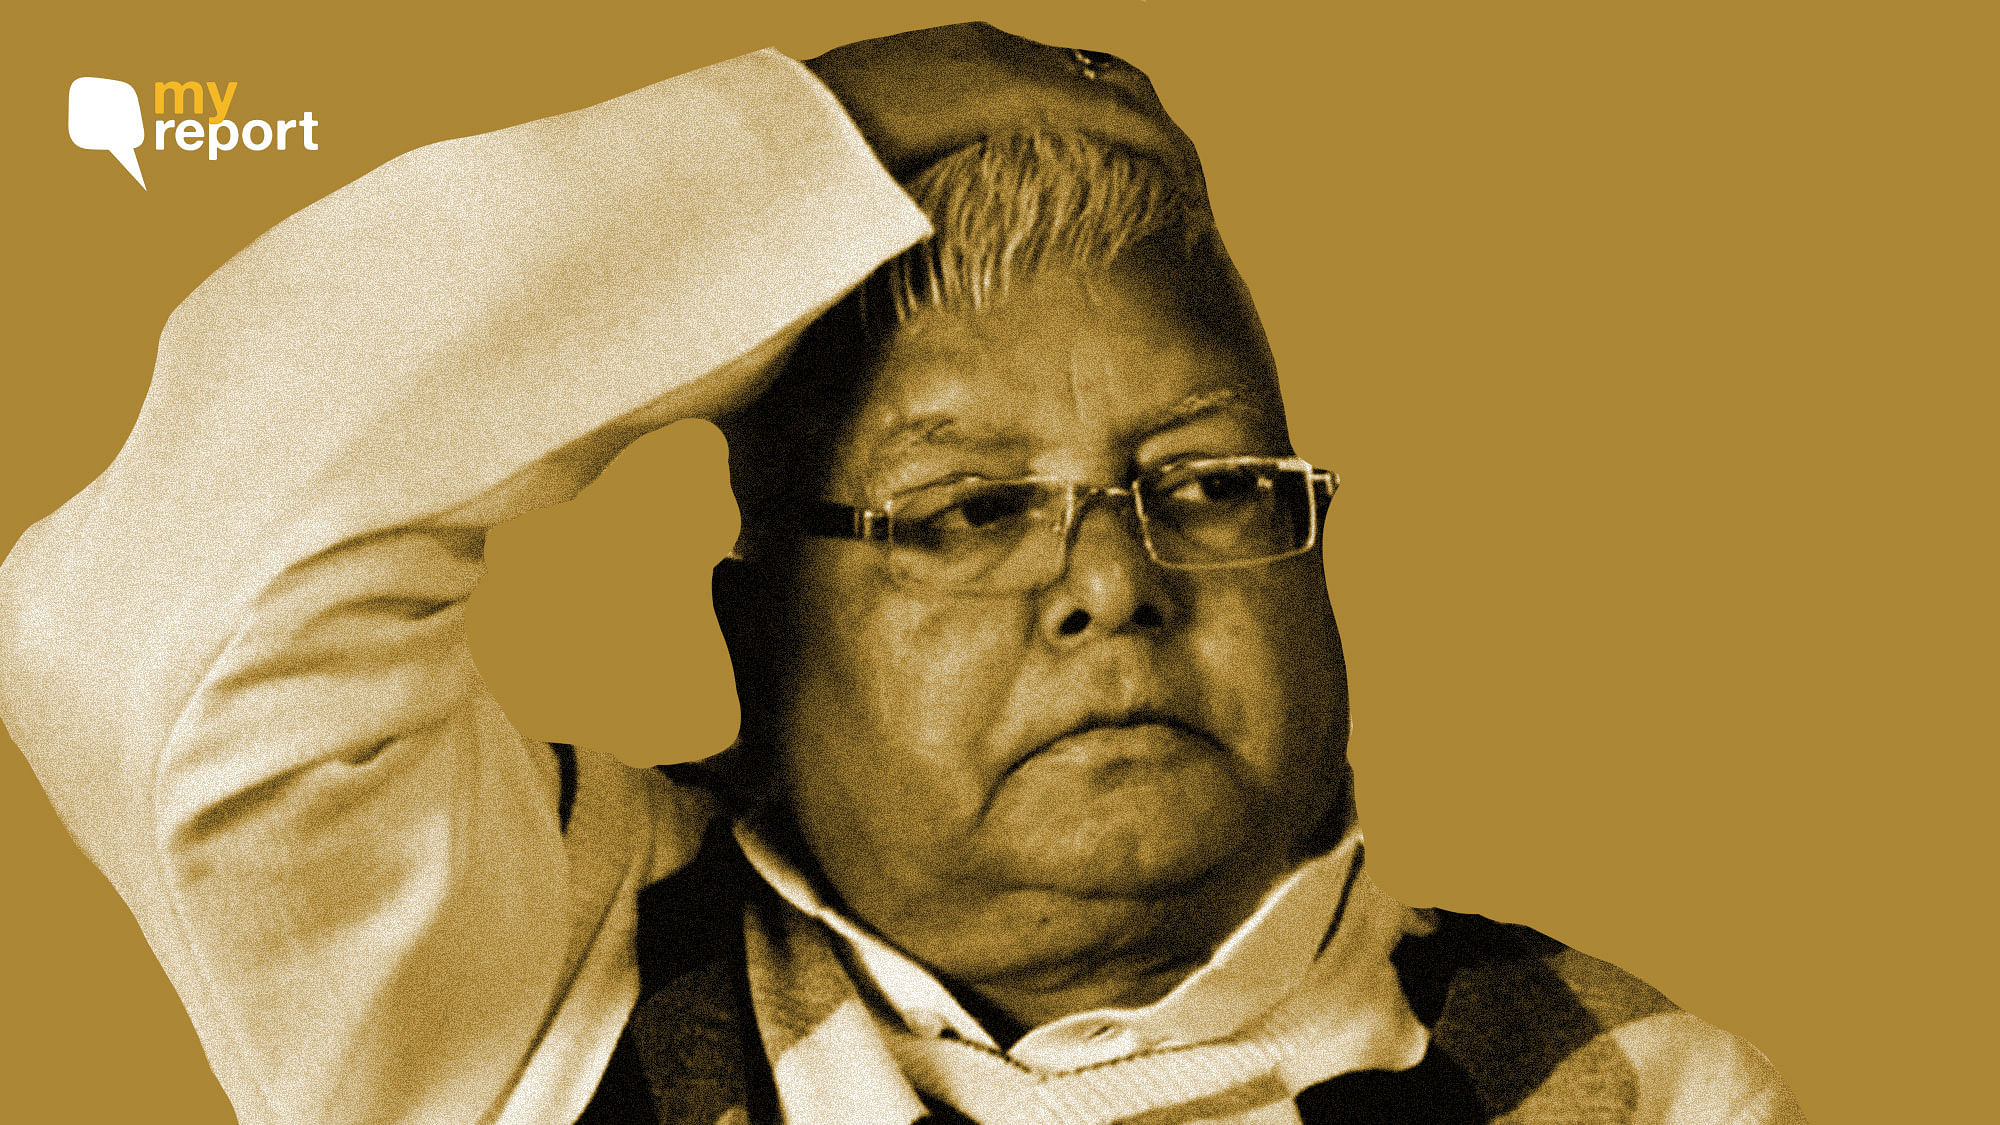 The mainstream media played an important role in creating a bad image for Lalu Prasad.